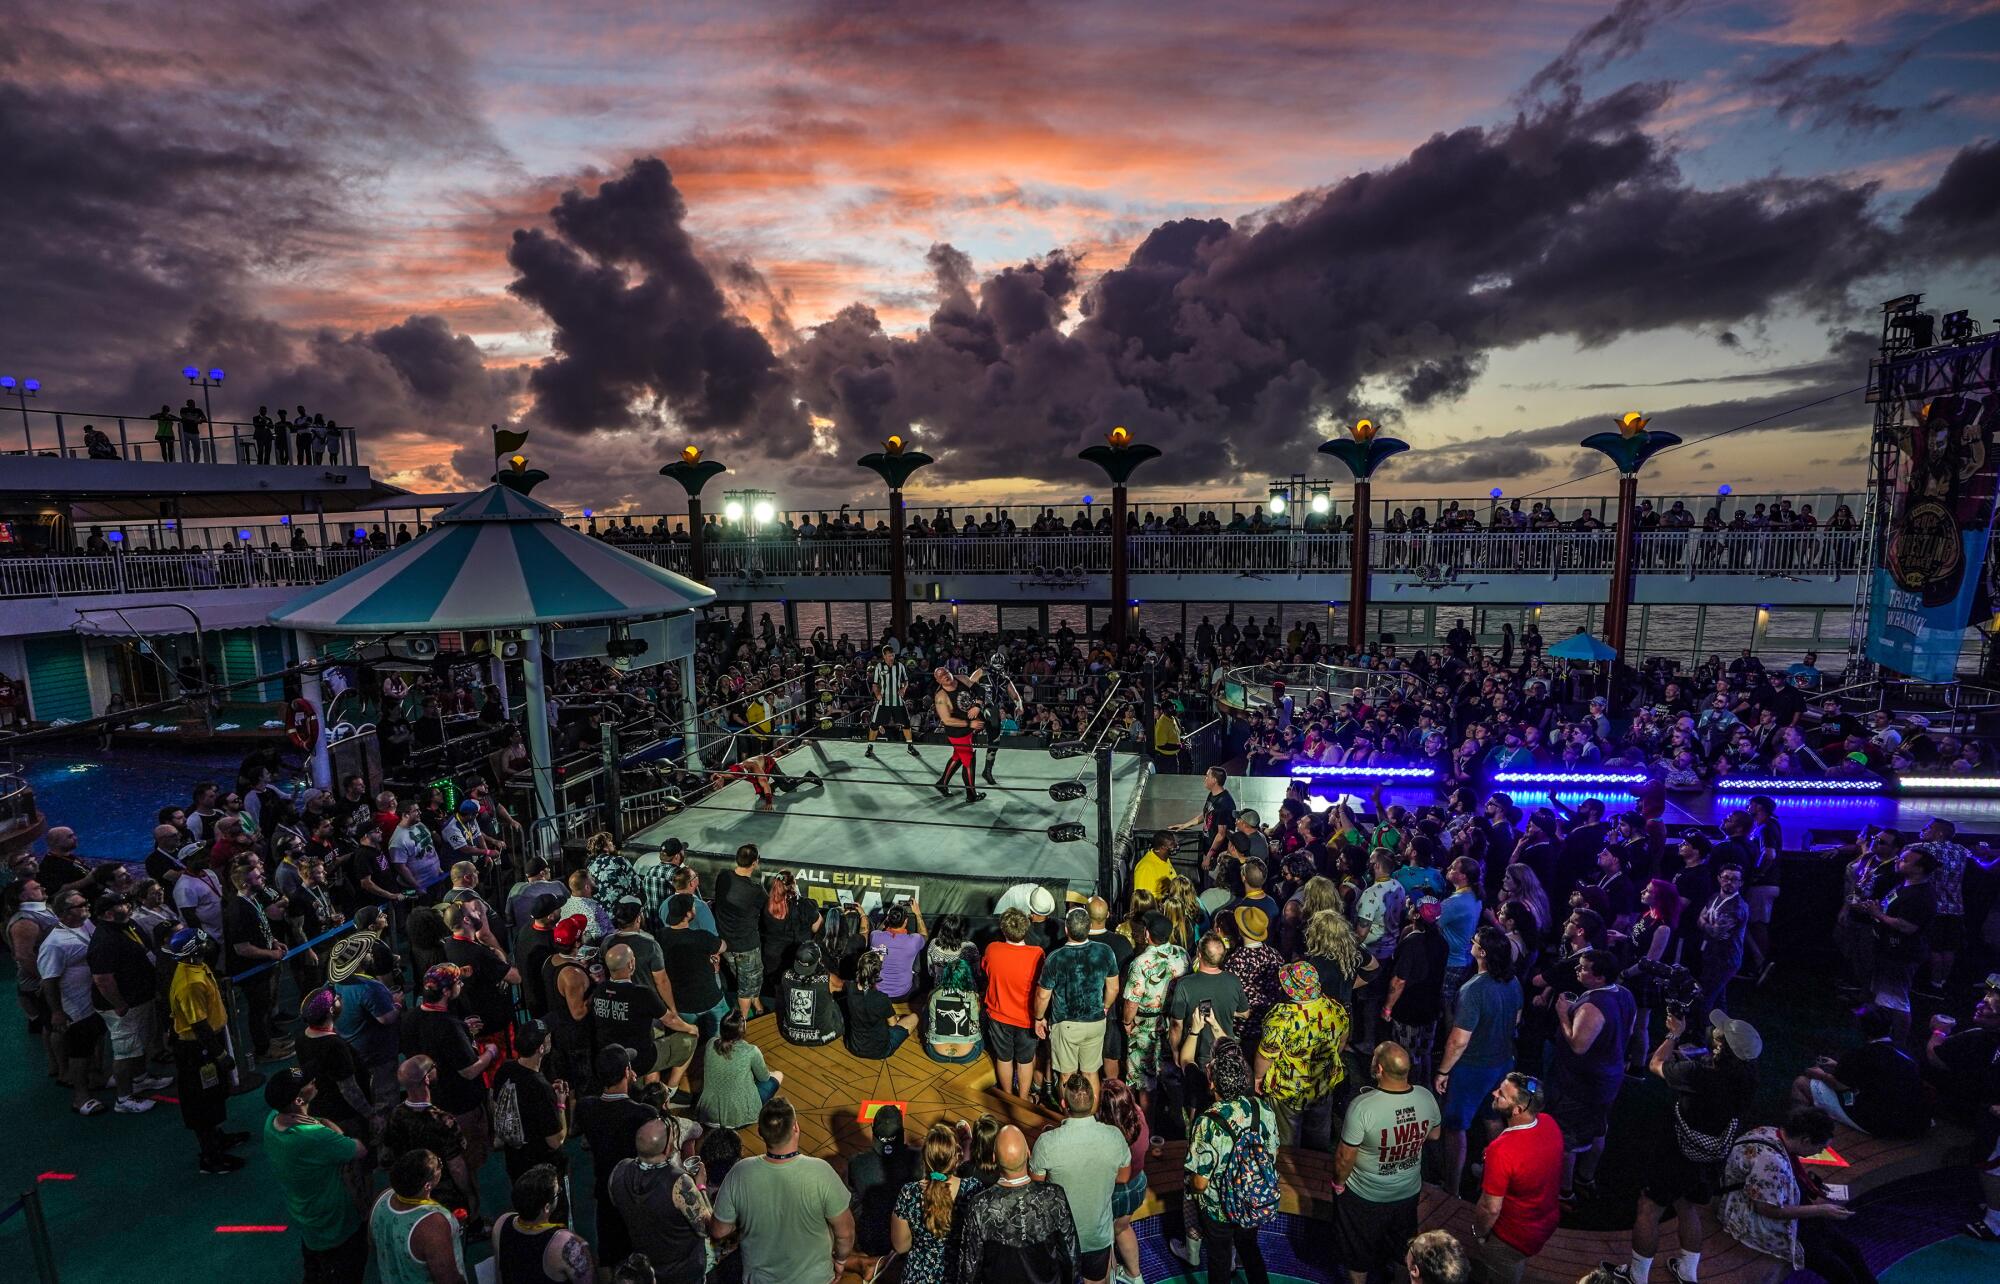 People watch a wrestling match on a cruise ship, with a sunset in the background